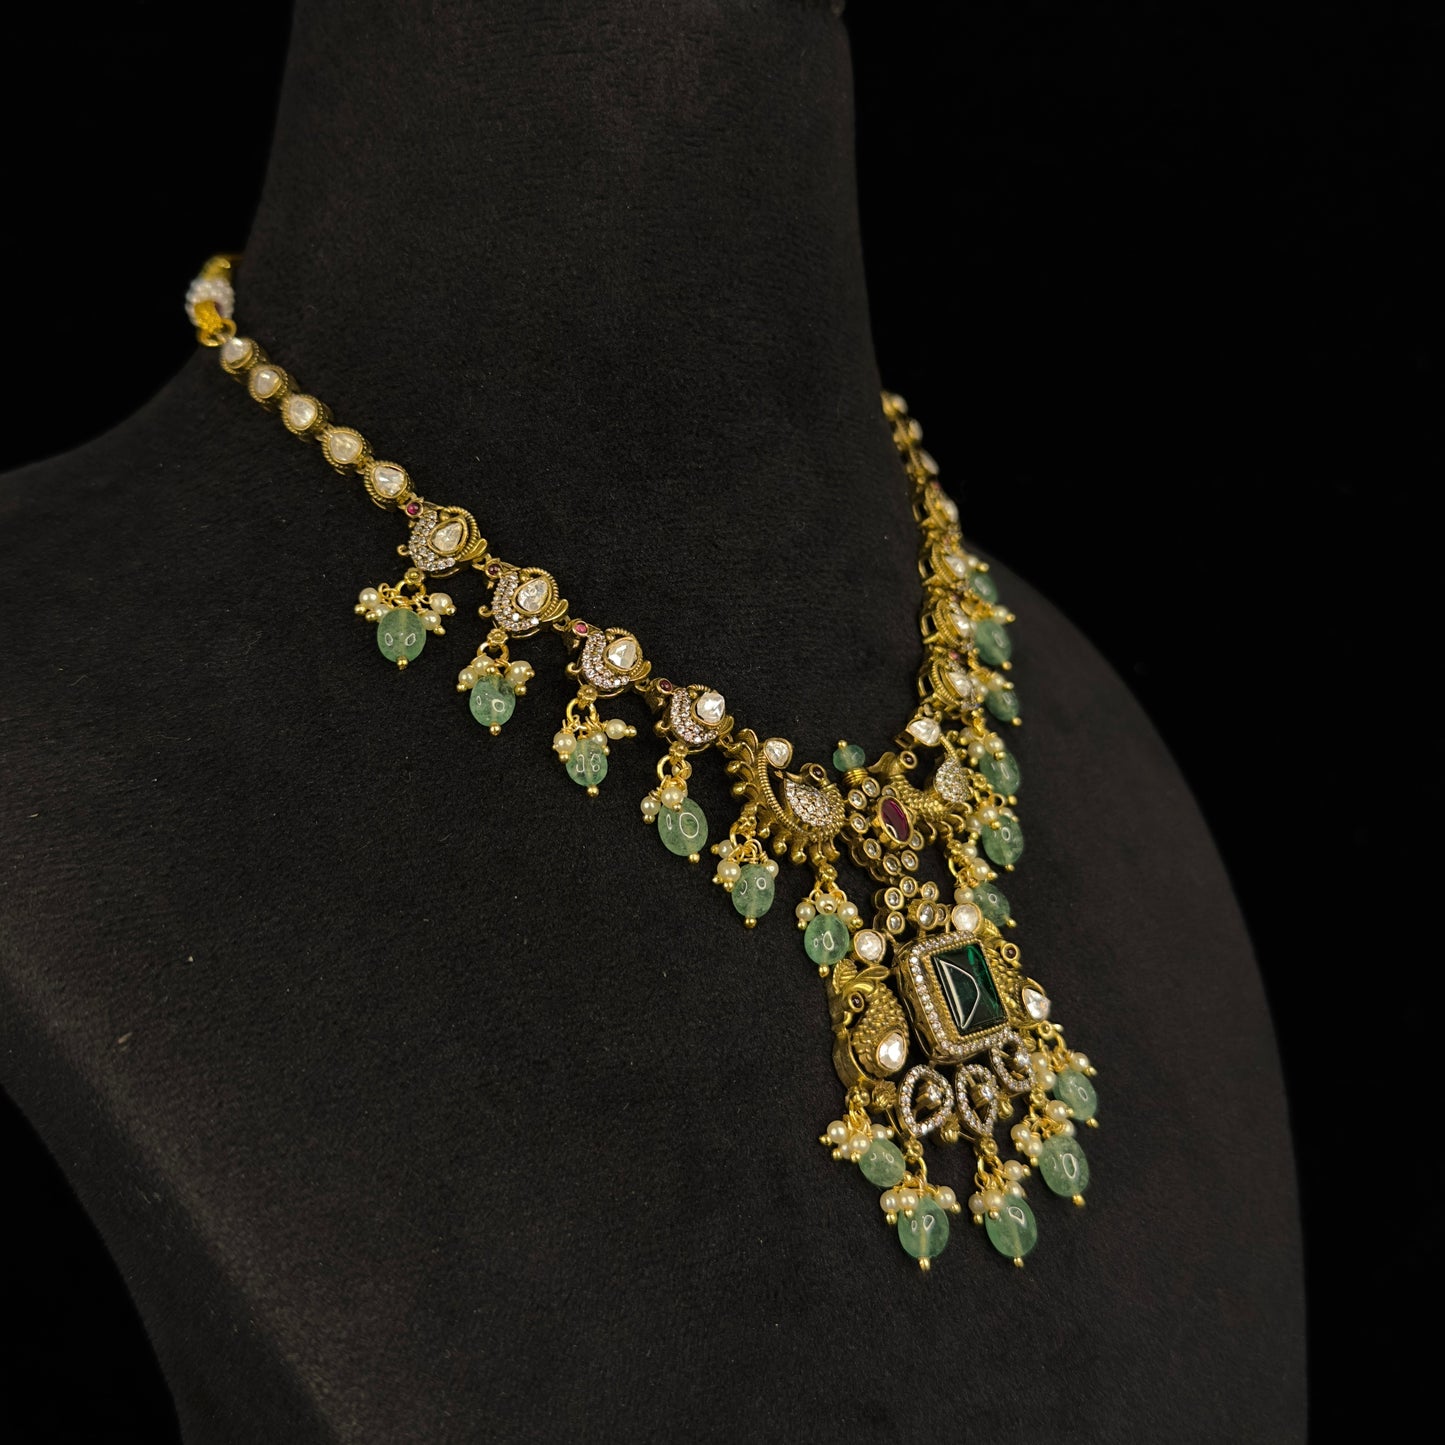 Antique Victorian finish Peacock Necklace with earrings